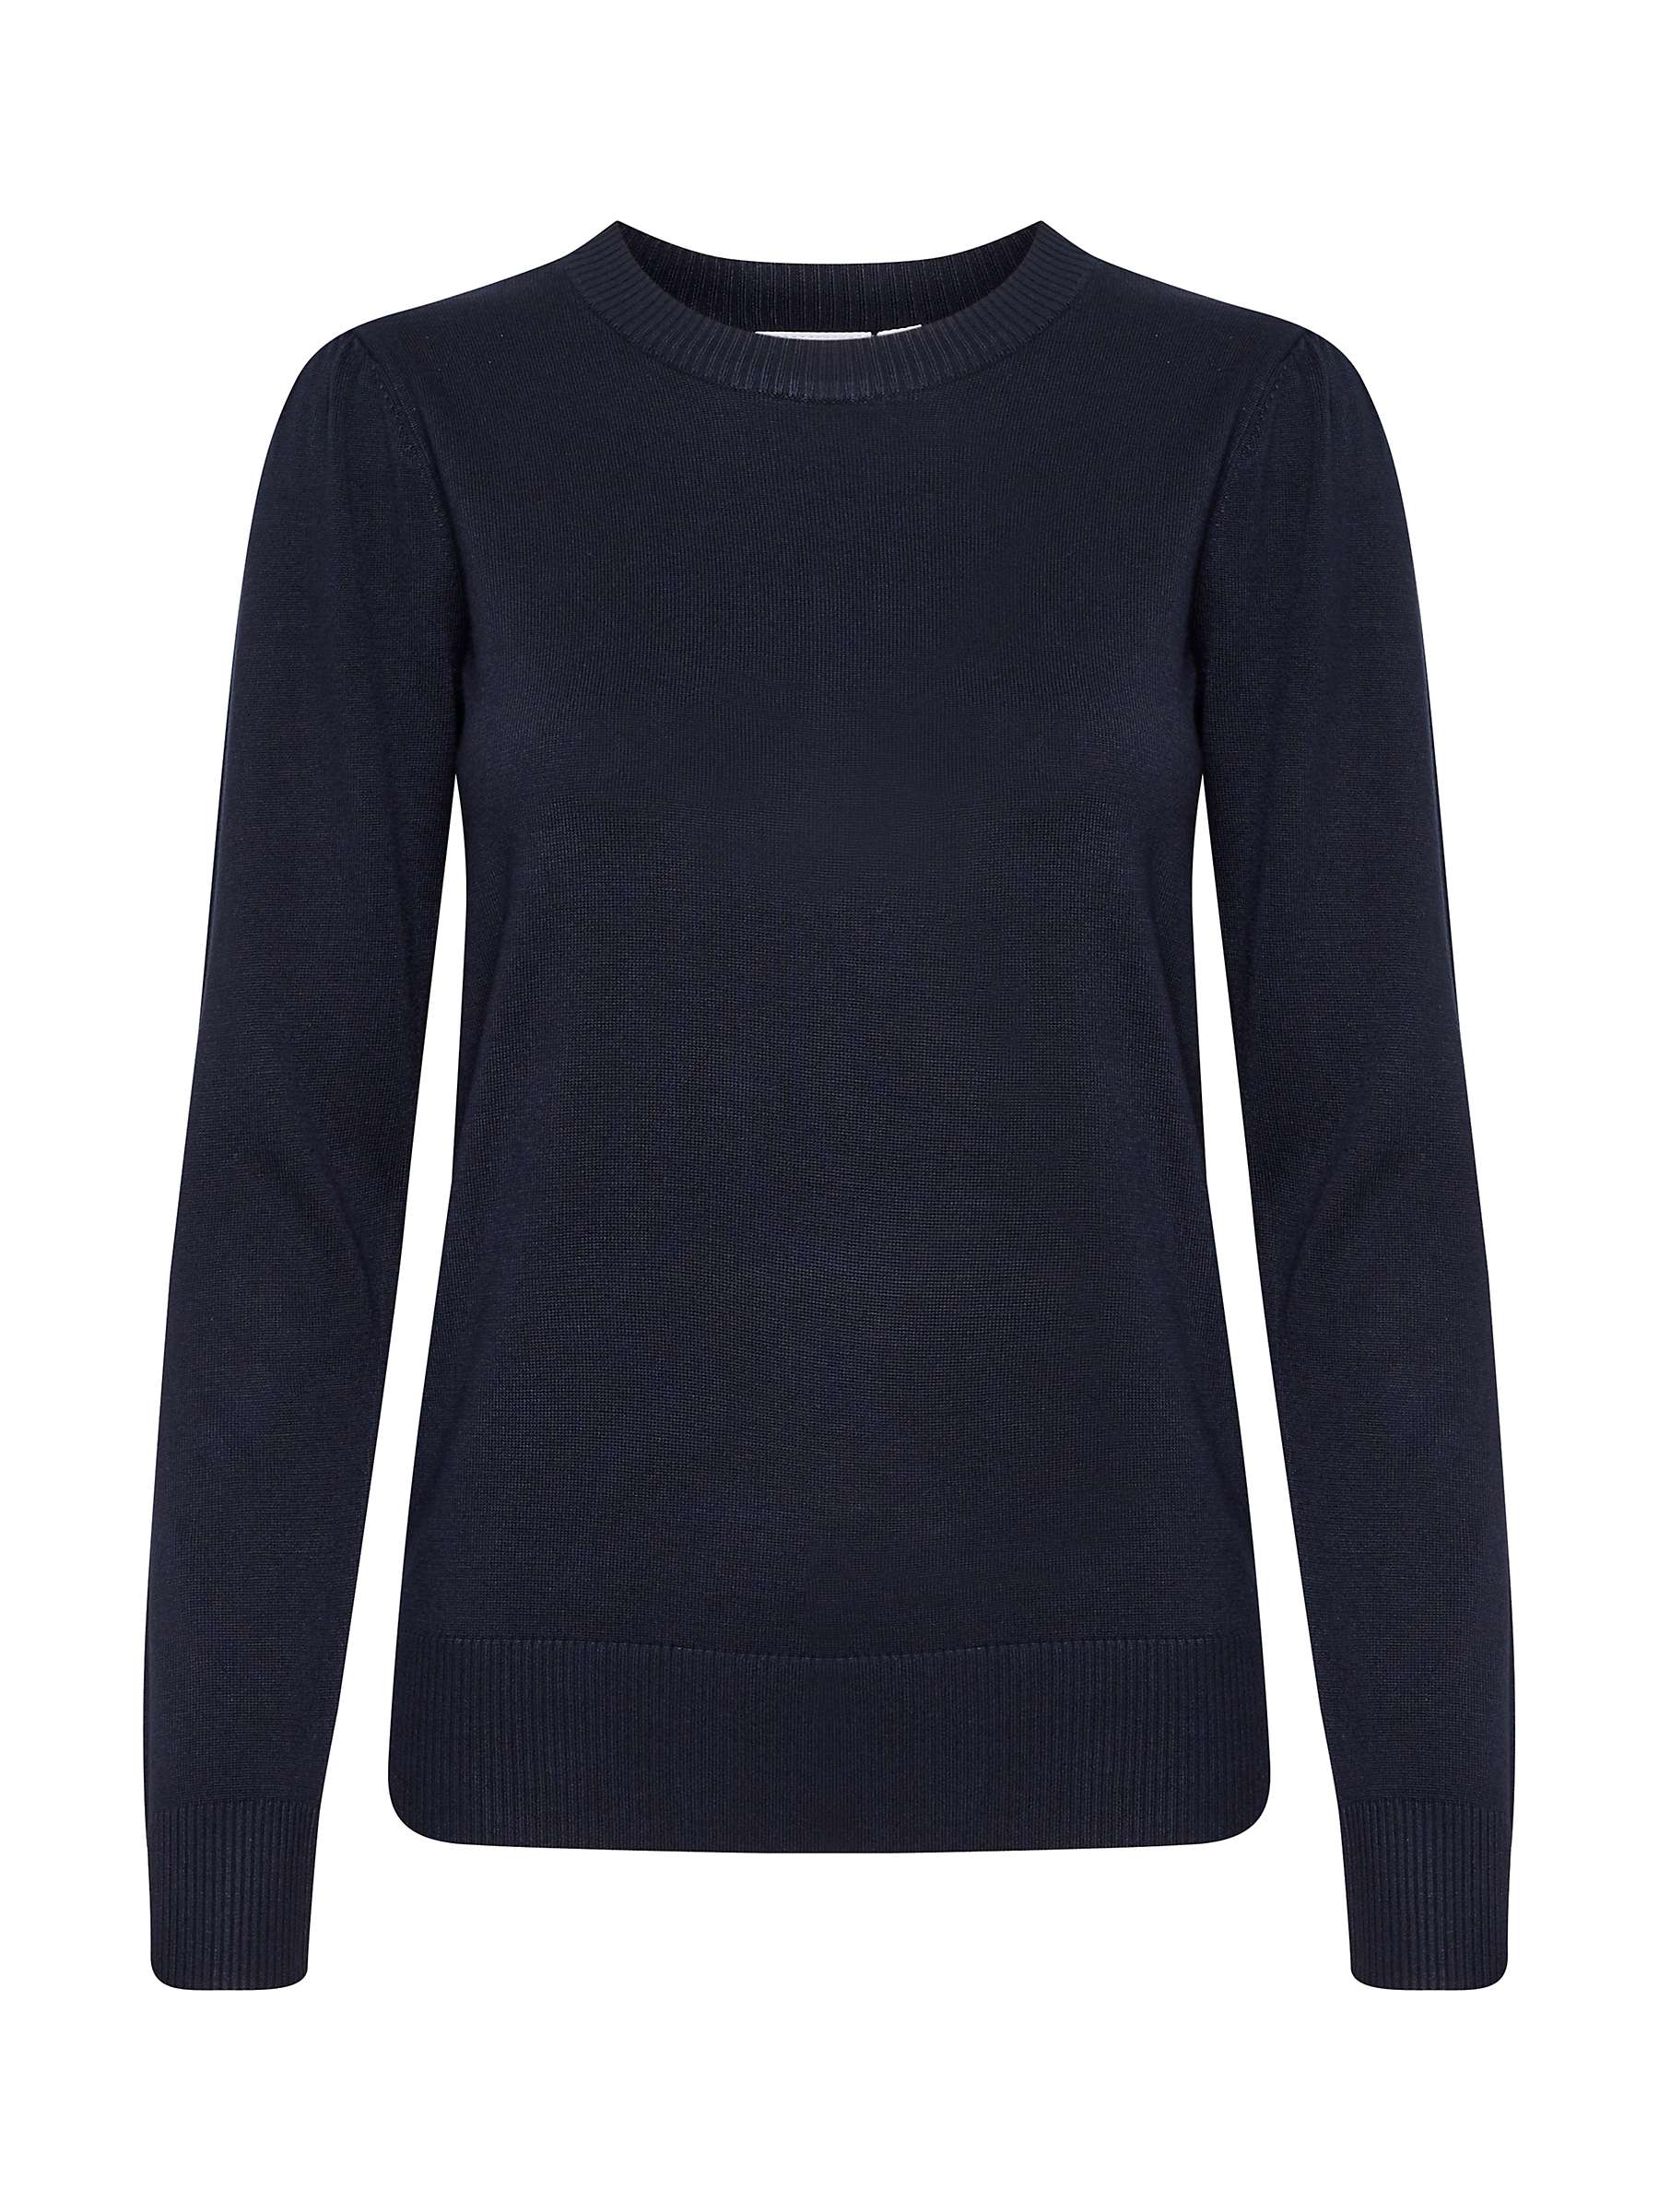 Saint Tropez Mila Knitted Pullover, Navy at John Lewis & Partners